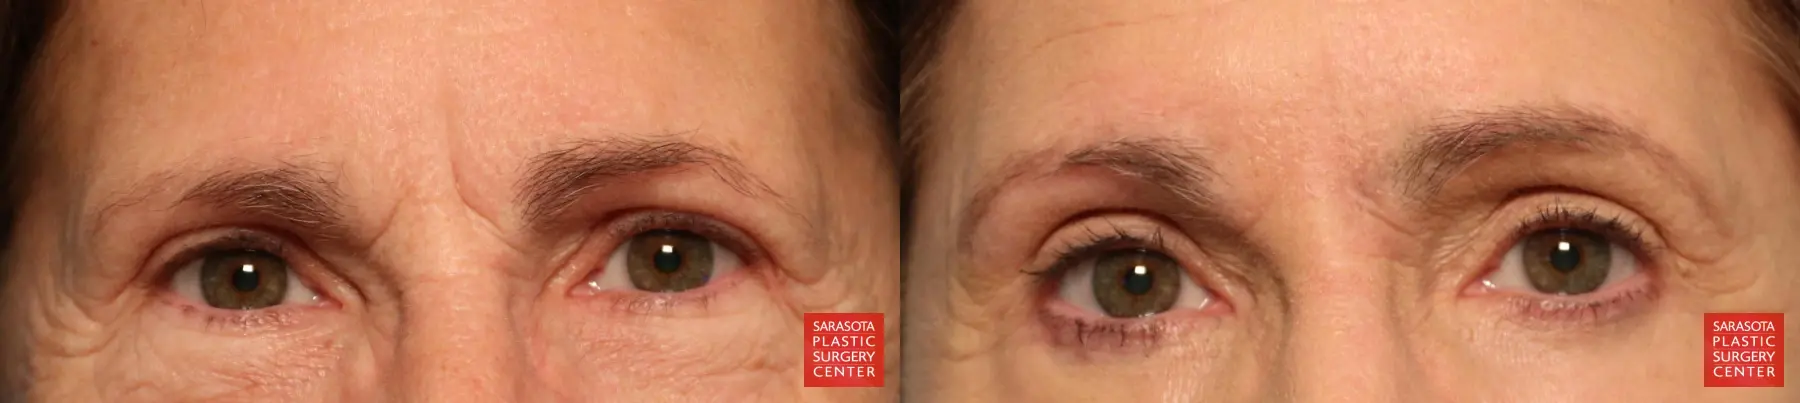 Eyelid Lift: Patient 28 - Before and After 1